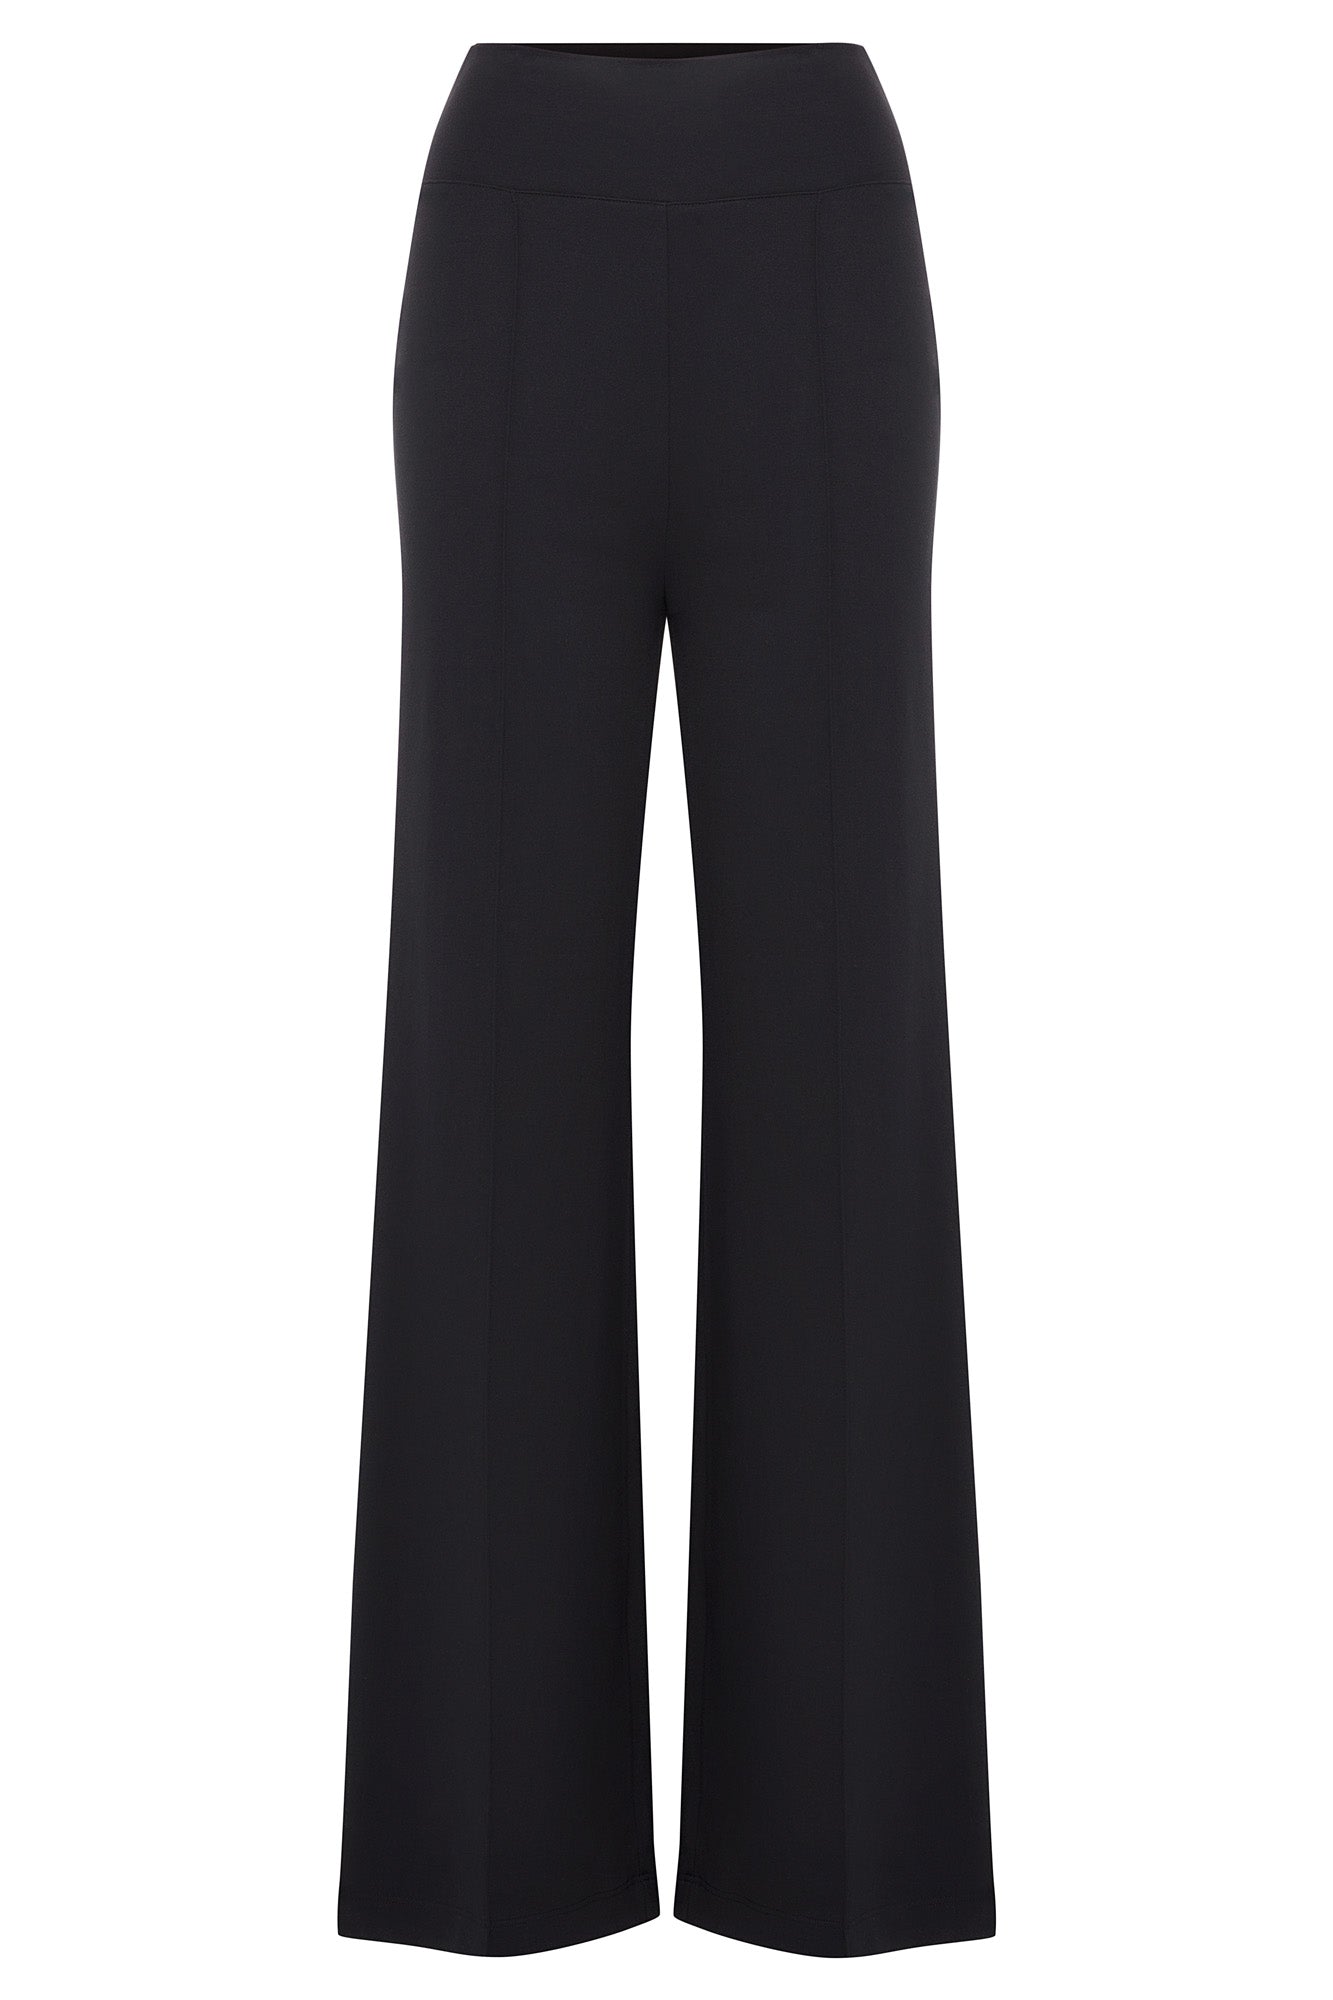 Flare Pants for Women, Black, Women's Sustainable Clothing